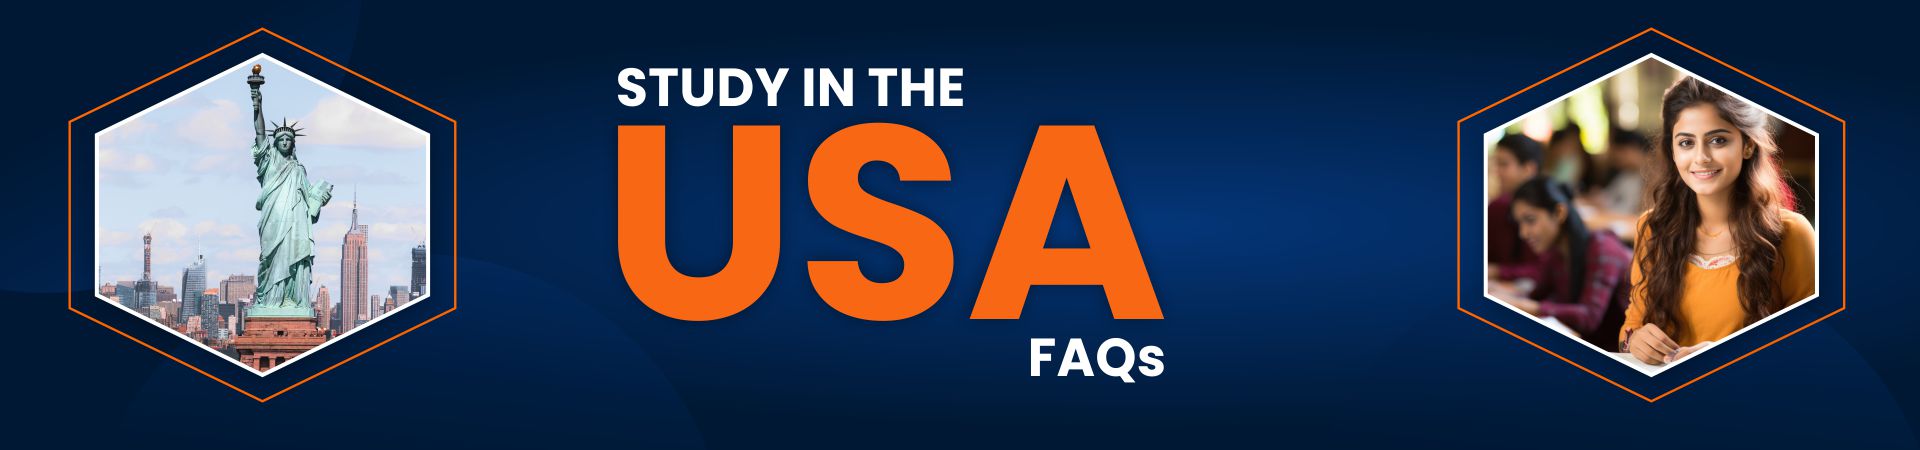 Study in the USA: FAQs